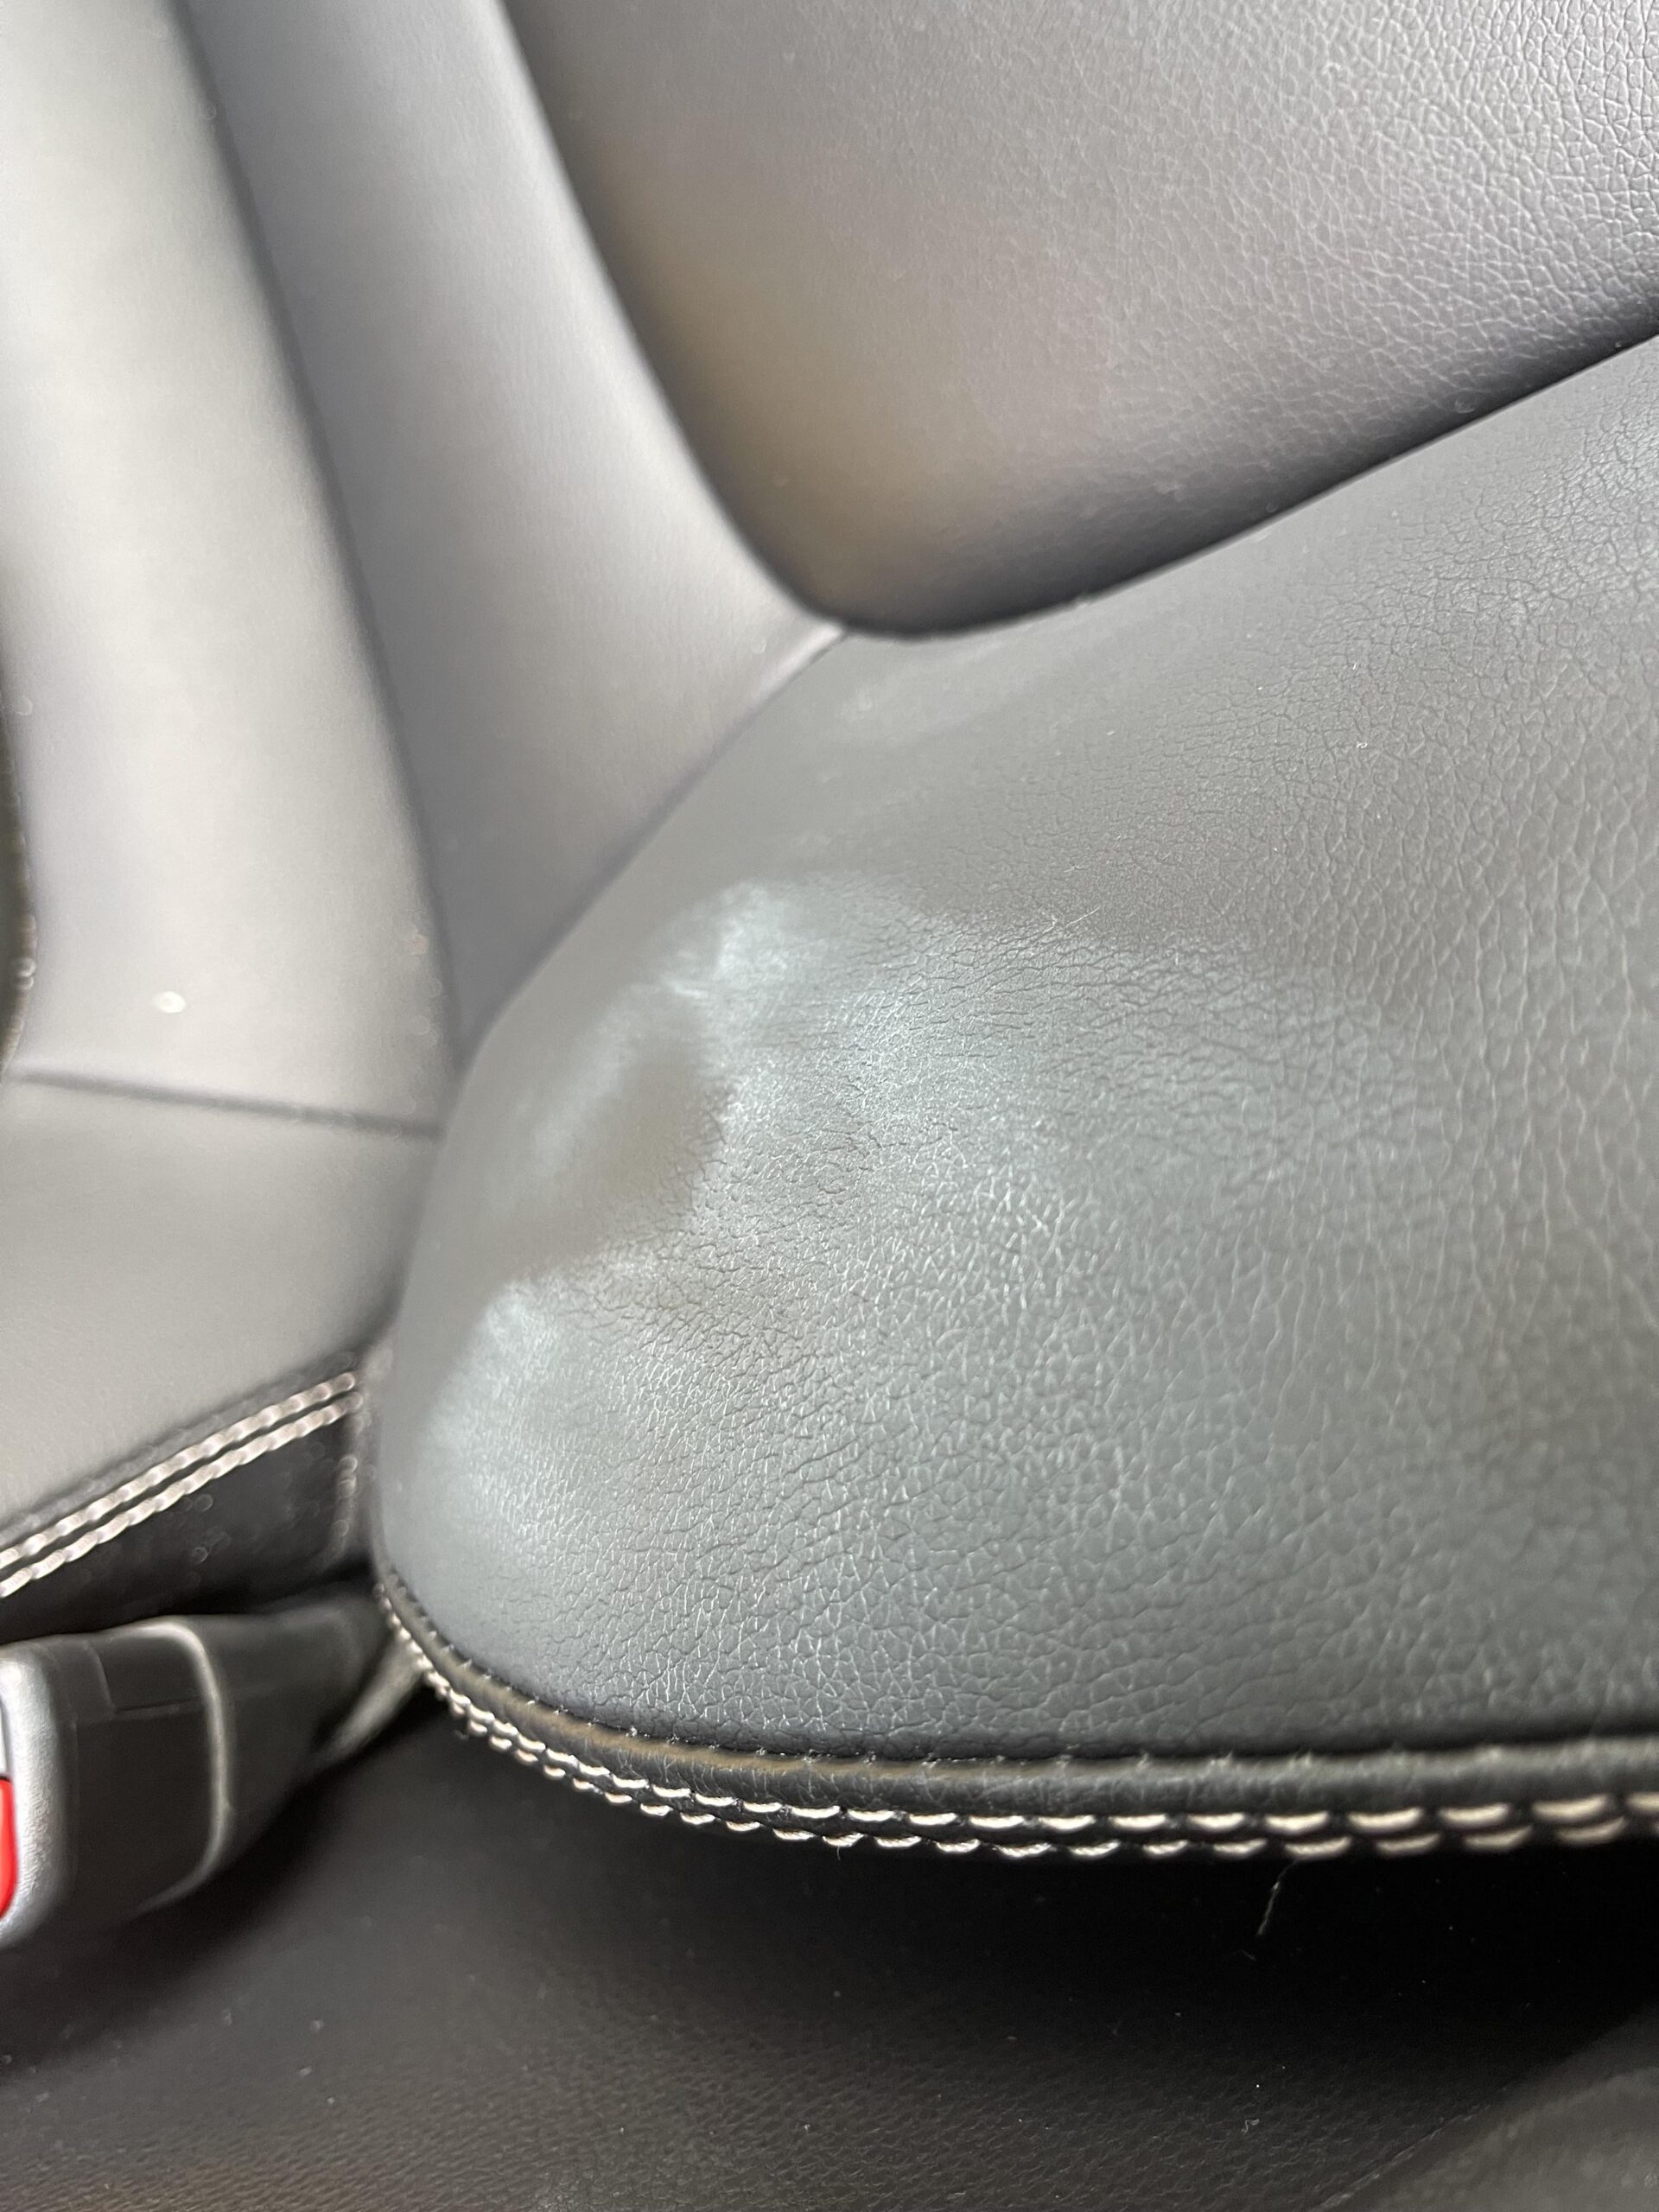 How to Get Sunblock off Car Interior